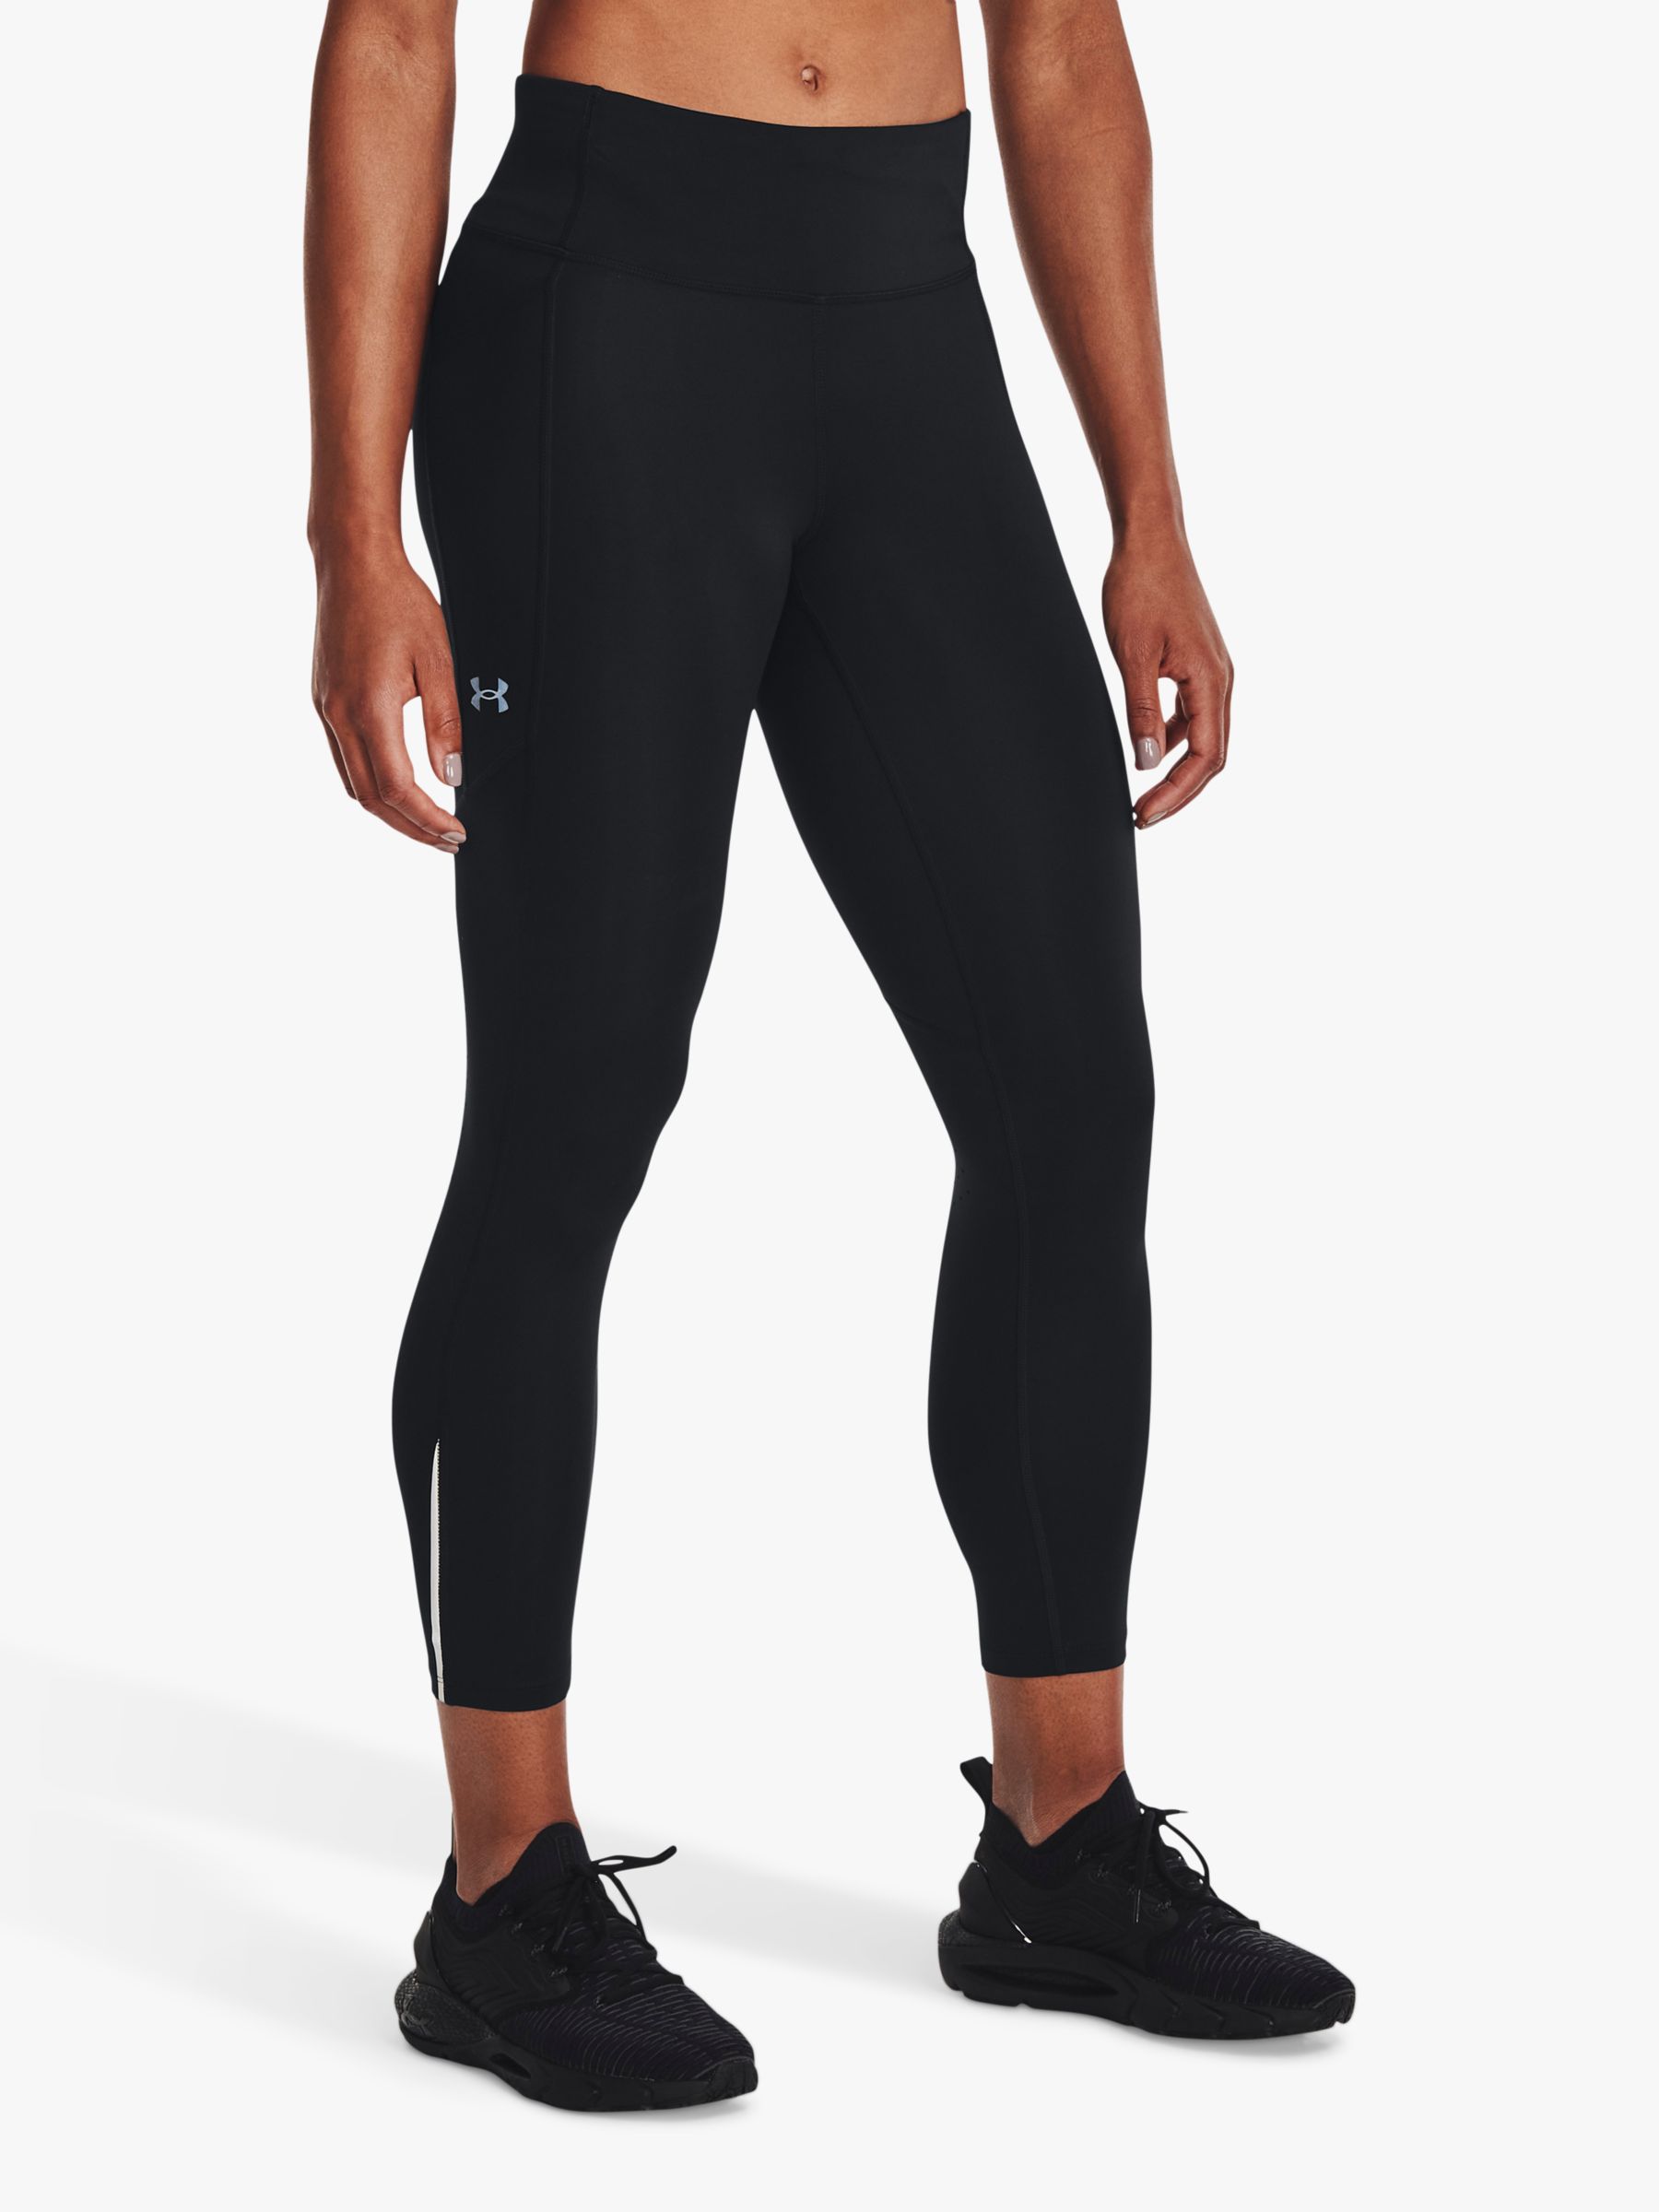 Under Armour Fly-By Compression Capri - Women's 